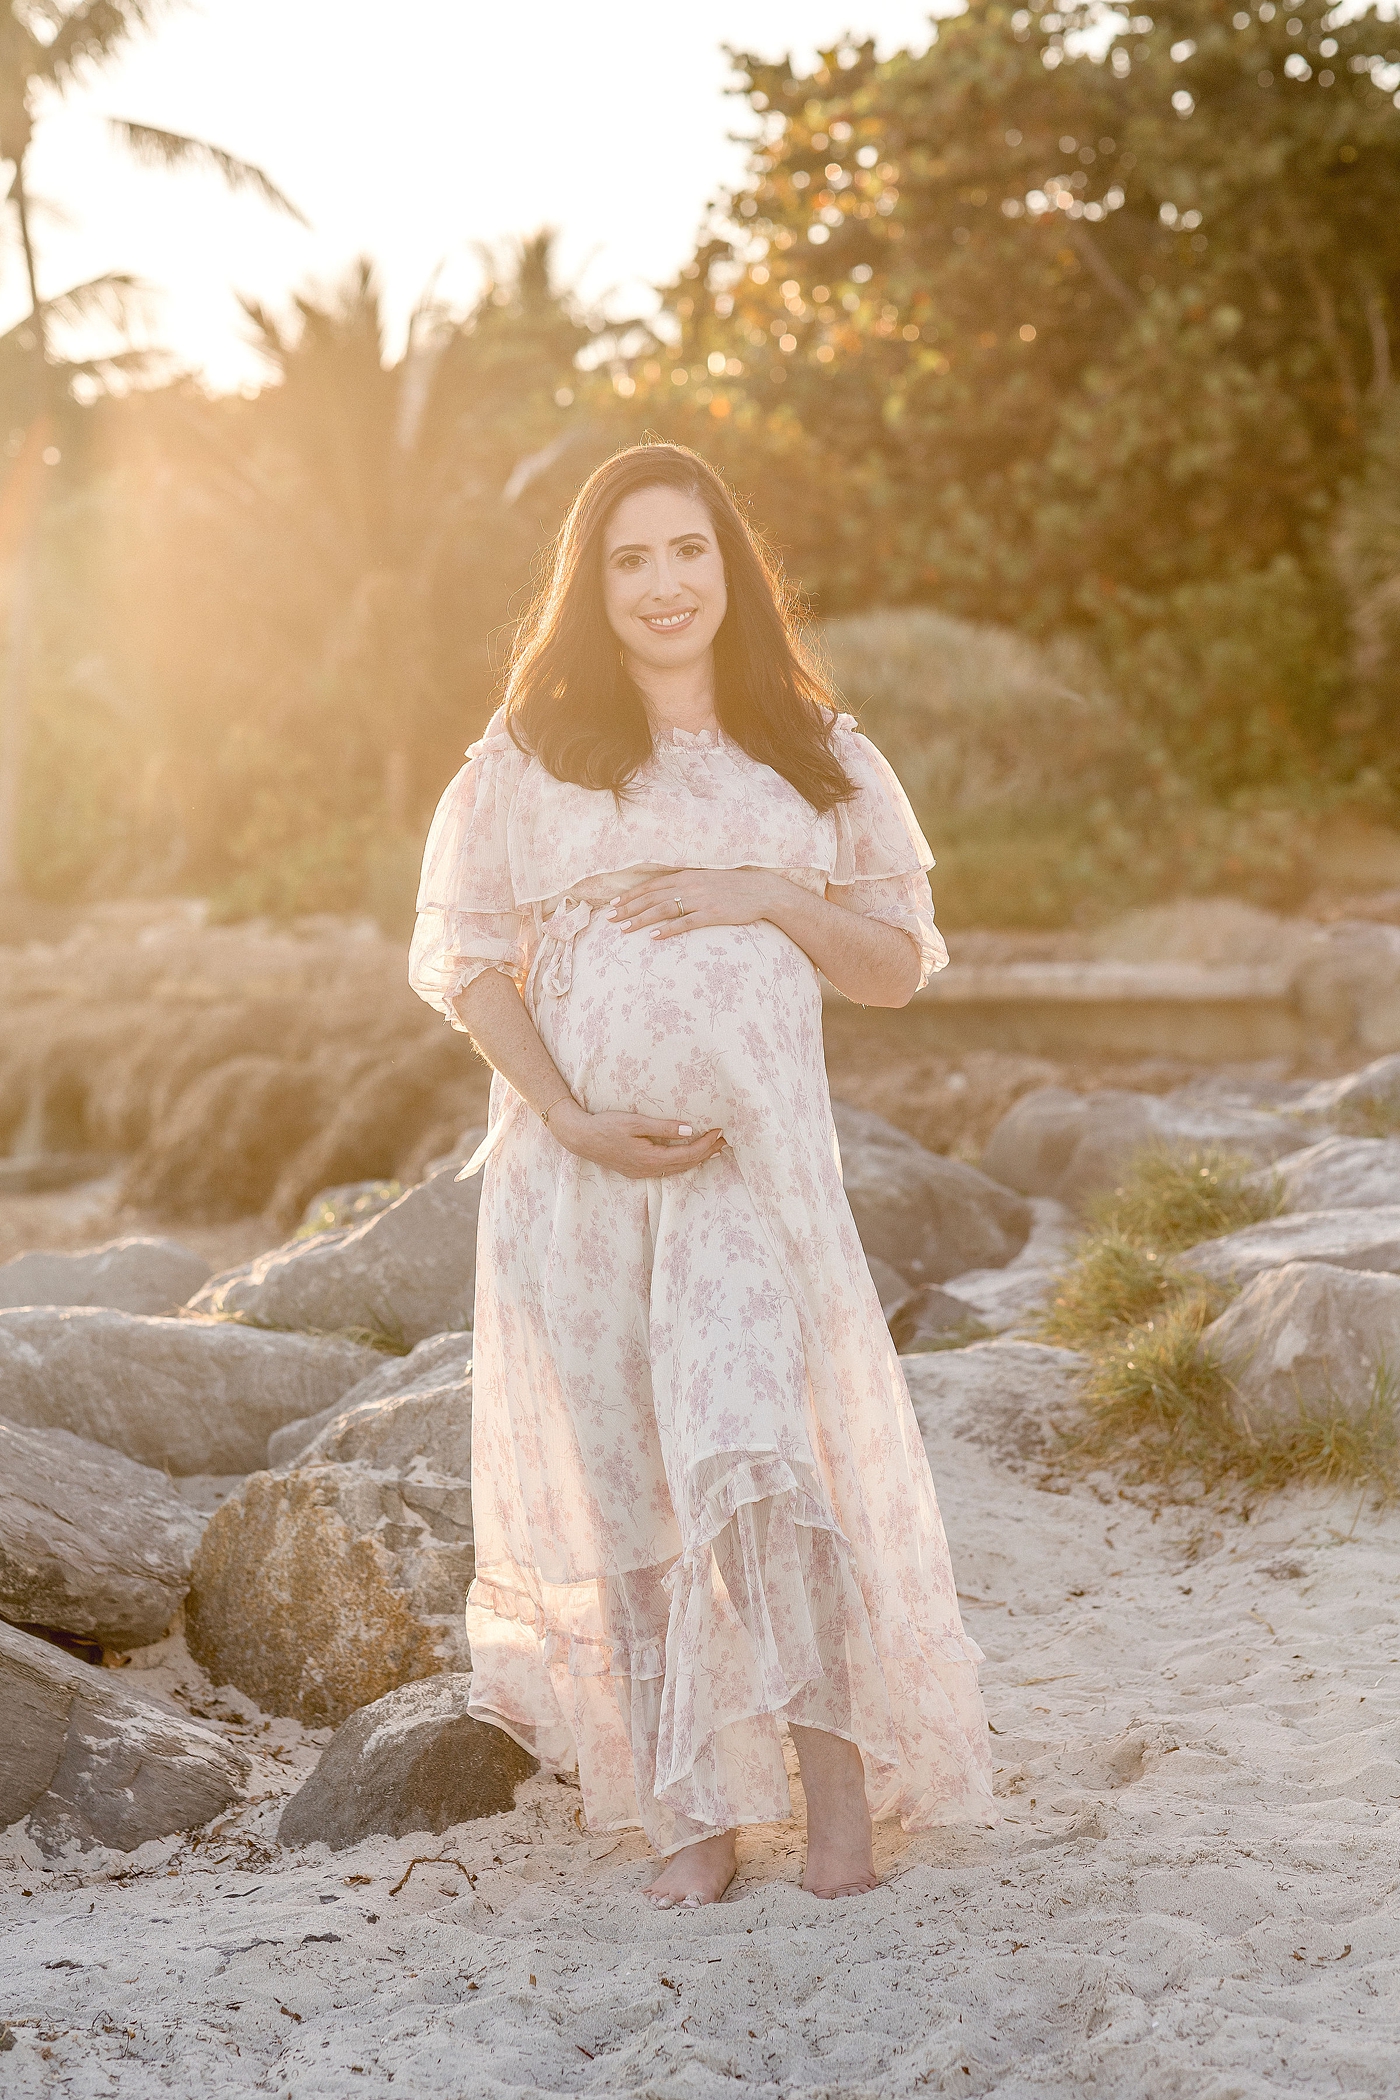 Mom to be stuns in golden light during maternity session at El Farito Beach Miami FL. Photo by Ivanna Vidal Photography.